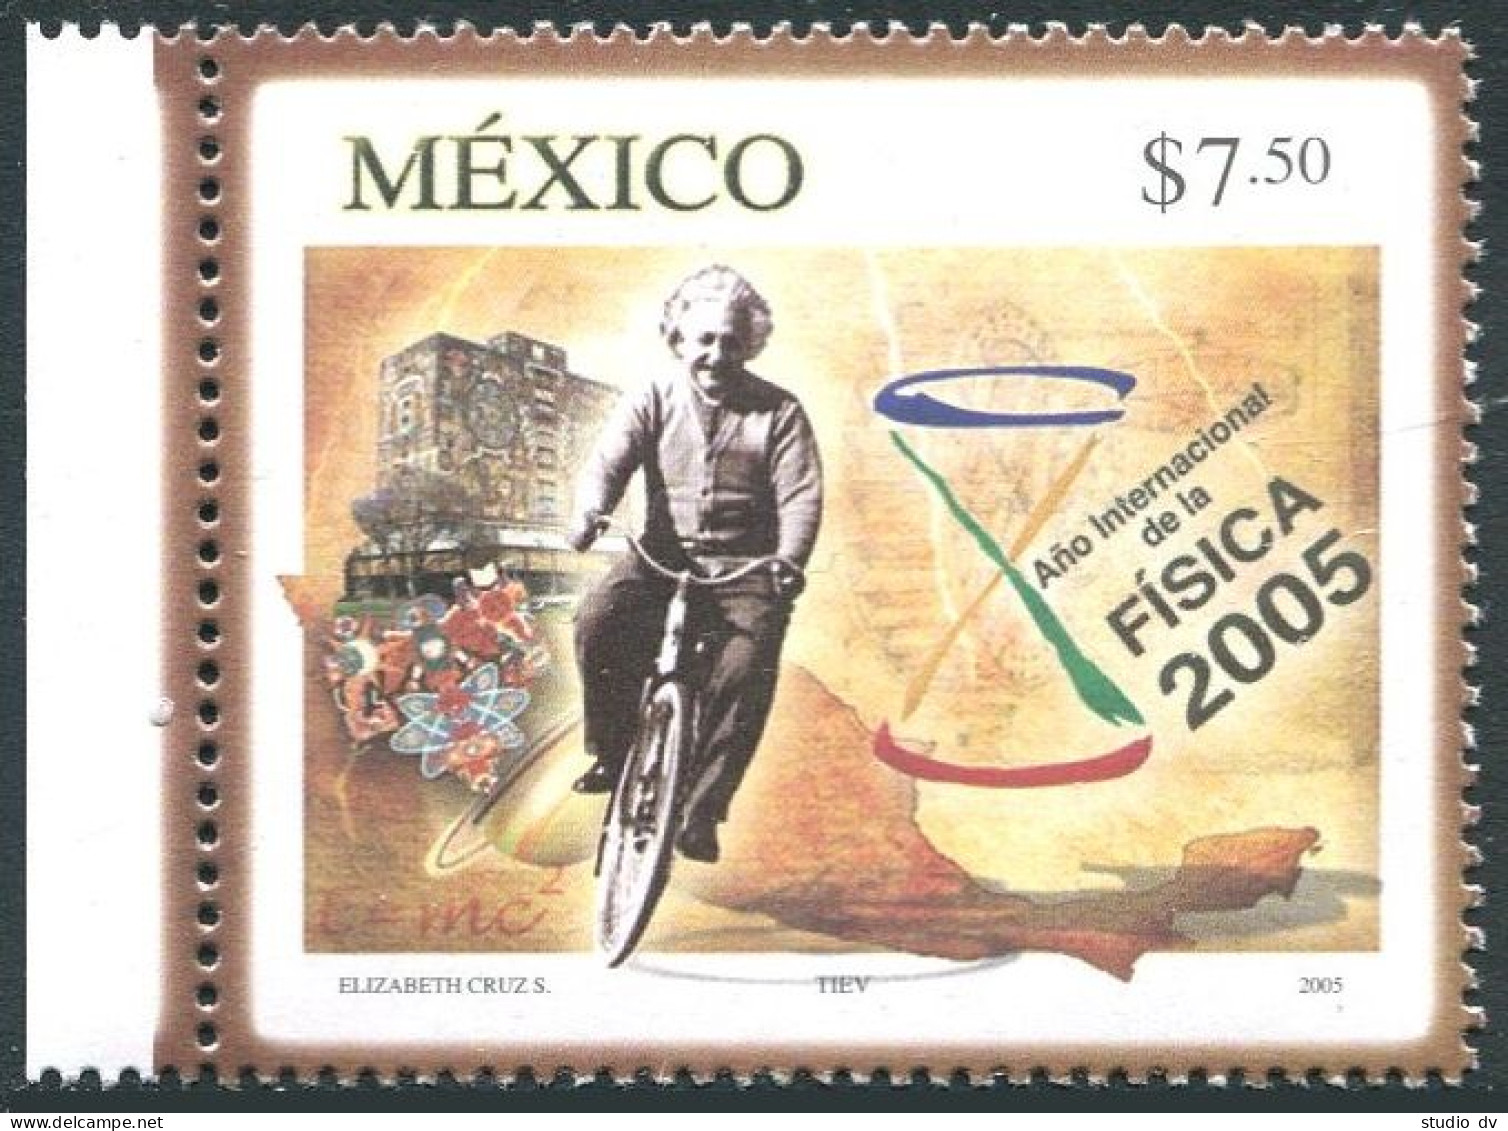 Mexico 2444, MNH. Year Of Physics, 2005. Albert Einstein, Bicycle. - Mexico